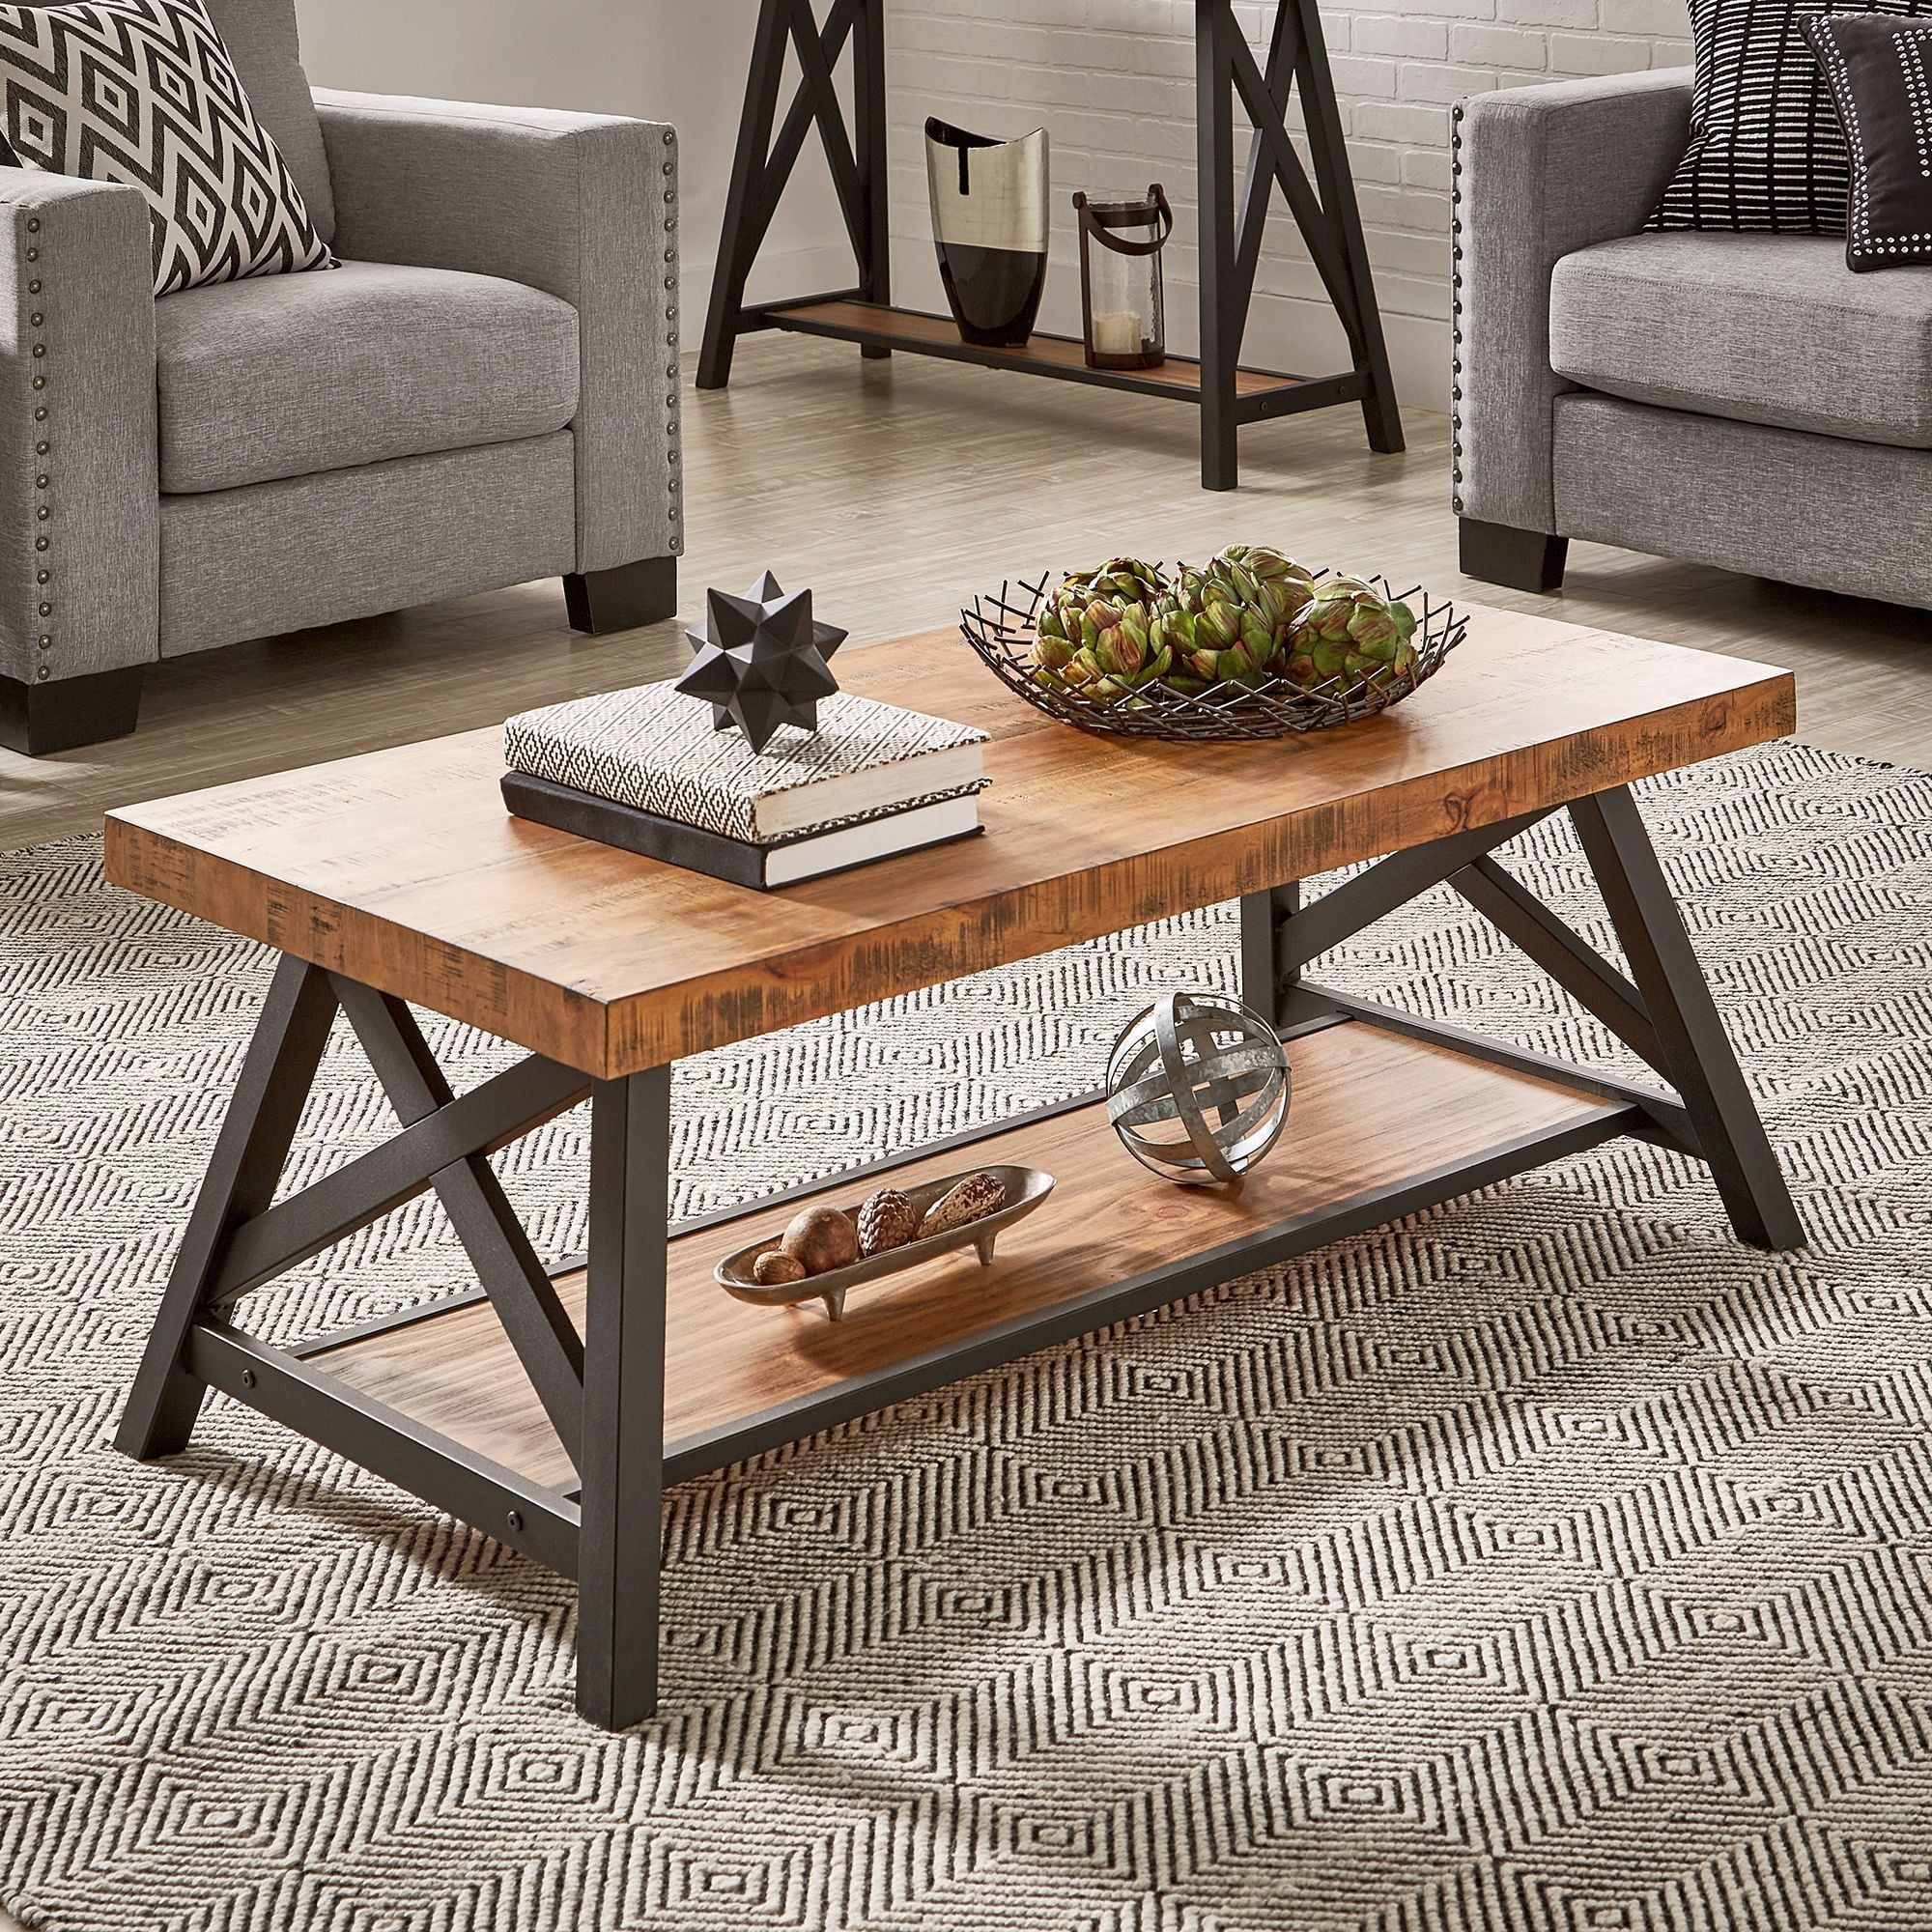 Weston Home Westyn Rustic X Base Wood Rectangular Coffee Table, Gray –  Walmart In Rectangular Coffee Tables With Pedestal Bases (View 10 of 15)